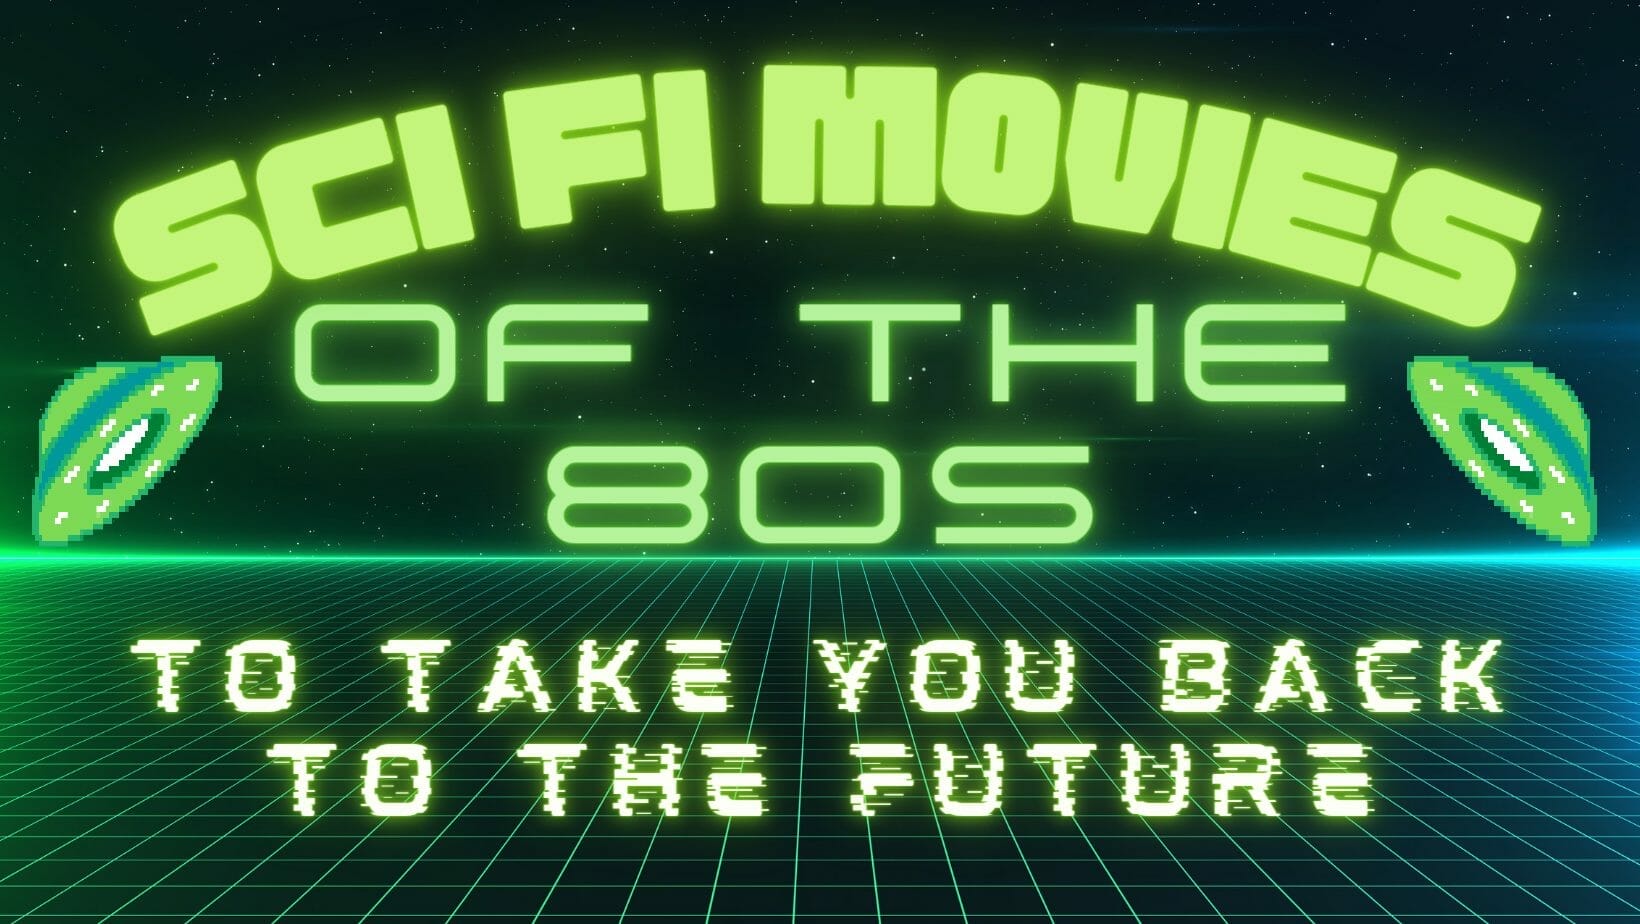 Sci Fi Movies Of The 80s To Take You Back To The Future